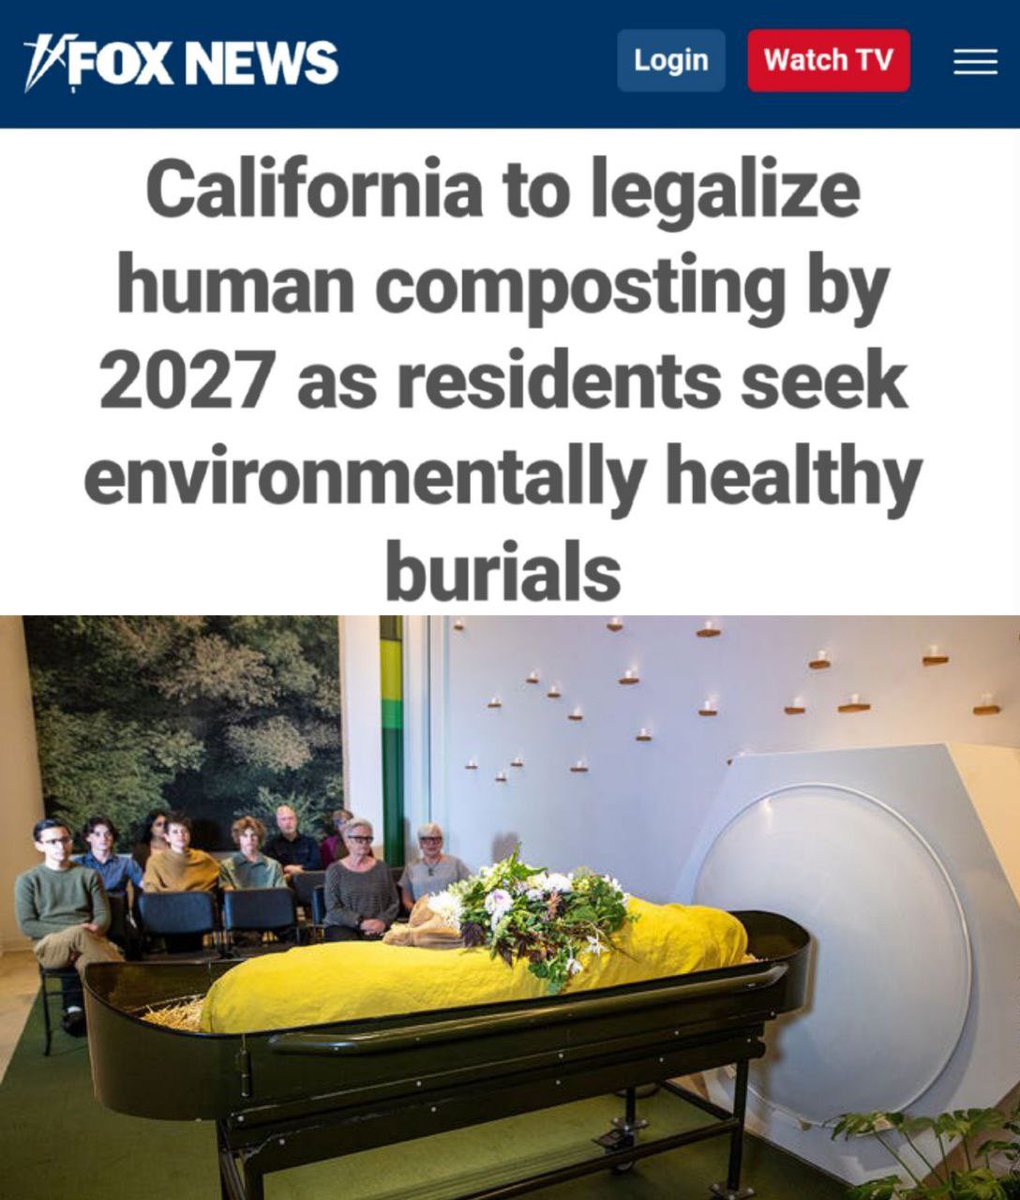 Never read news before breakfast 🤦‍♂️ Just read: “California will legalize human composting by 2027 as residents strive to make the burial process environmentally friendly”. Recycling dead bodies into fertilizers - environmentally friendly and convenient they say 🤷‍♂️🙈🤦‍♂️